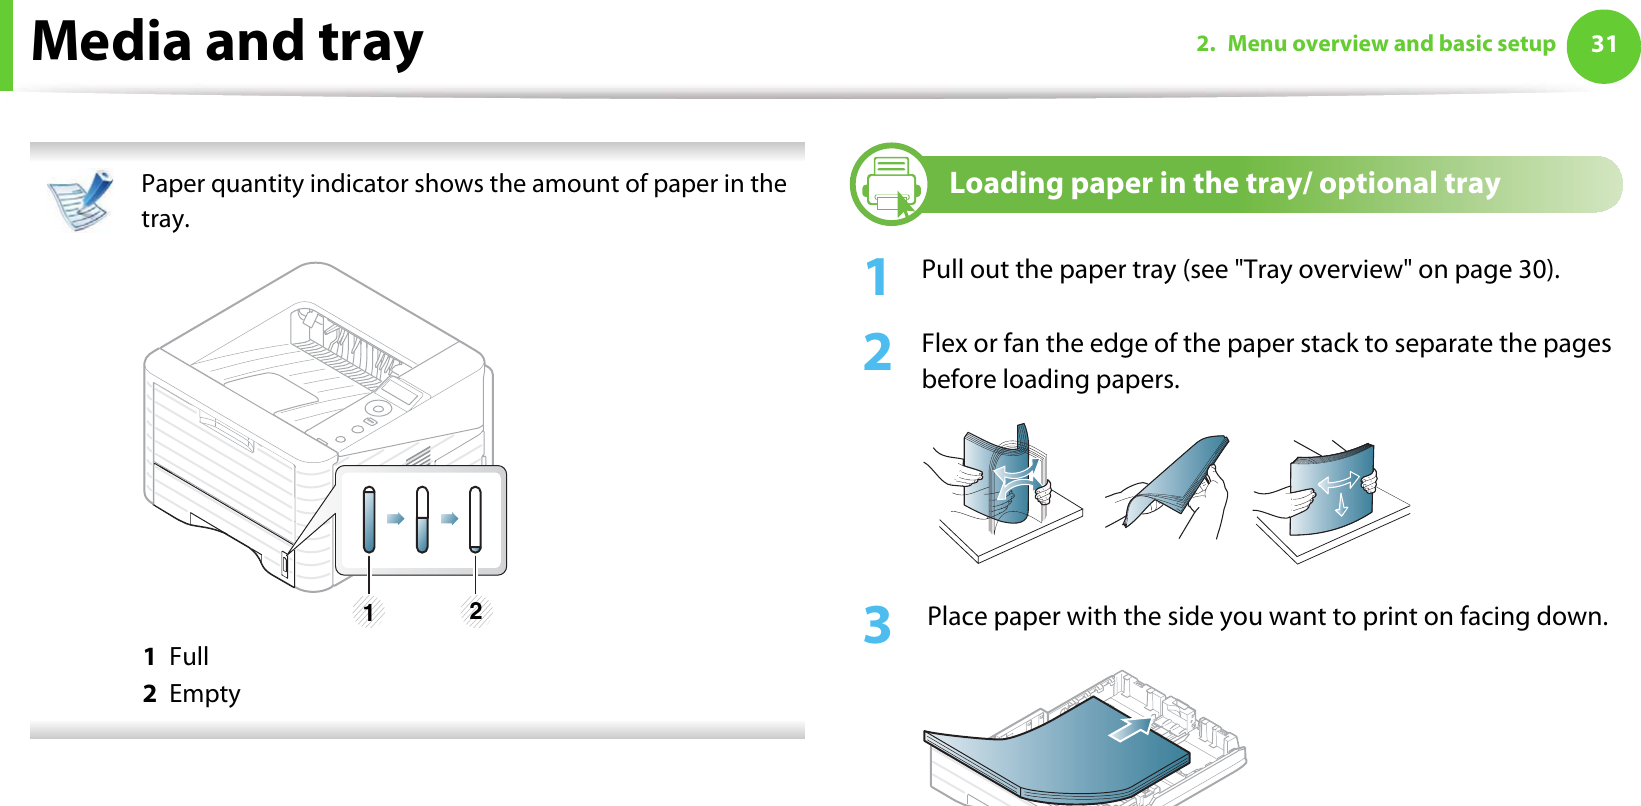 Media and tray 312. Menu overview and basic setup Paper quantity indicator shows the amount of paper in the tray. 1  Full2  Empty 2Loading paper in the tray/ optional tray1Pull out the paper tray (see &quot;Tray overview&quot; on page 30).2  Flex or fan the edge of the paper stack to separate the pages before loading papers.3   Place paper with the side you want to print on facing down.1 2